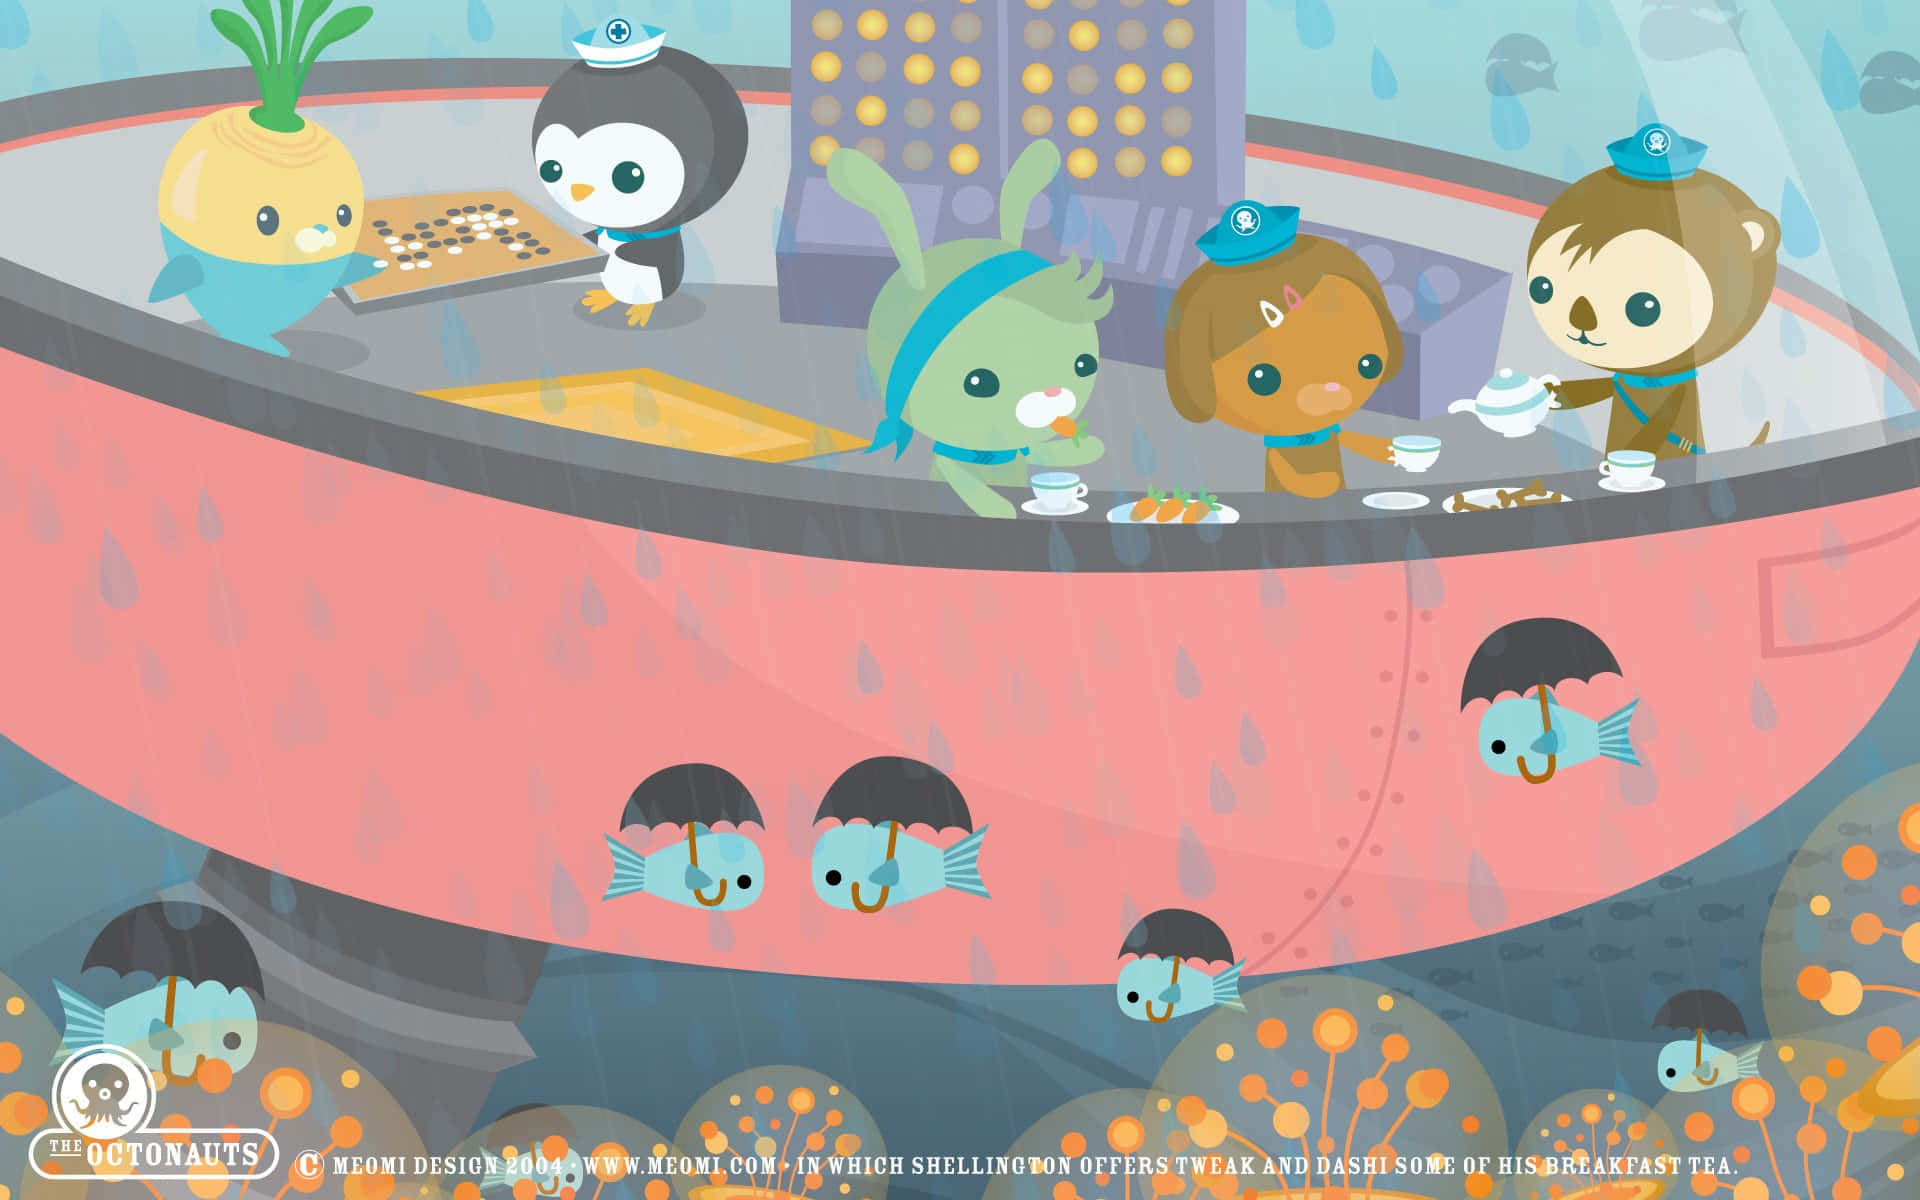 Explore a magical world of adventure with the Octonauts Wallpaper